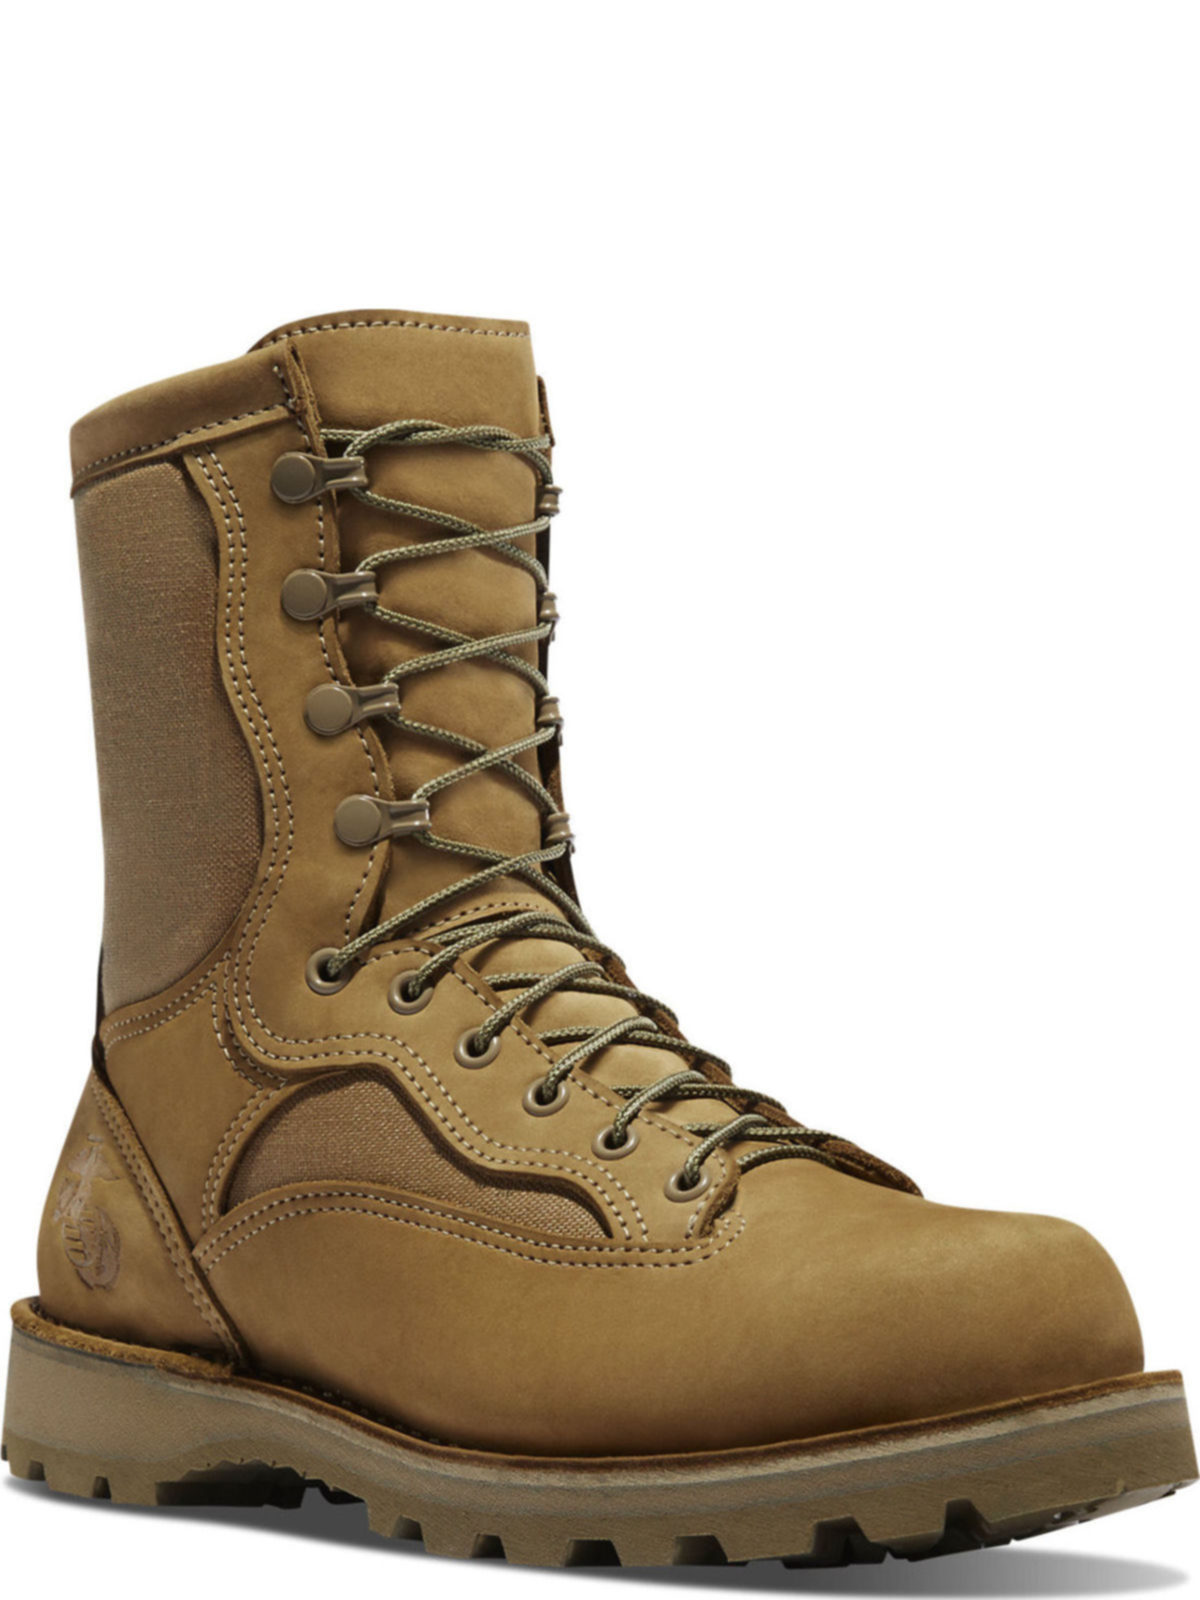 Shop Danner Marine Expeditionary Boot 8 